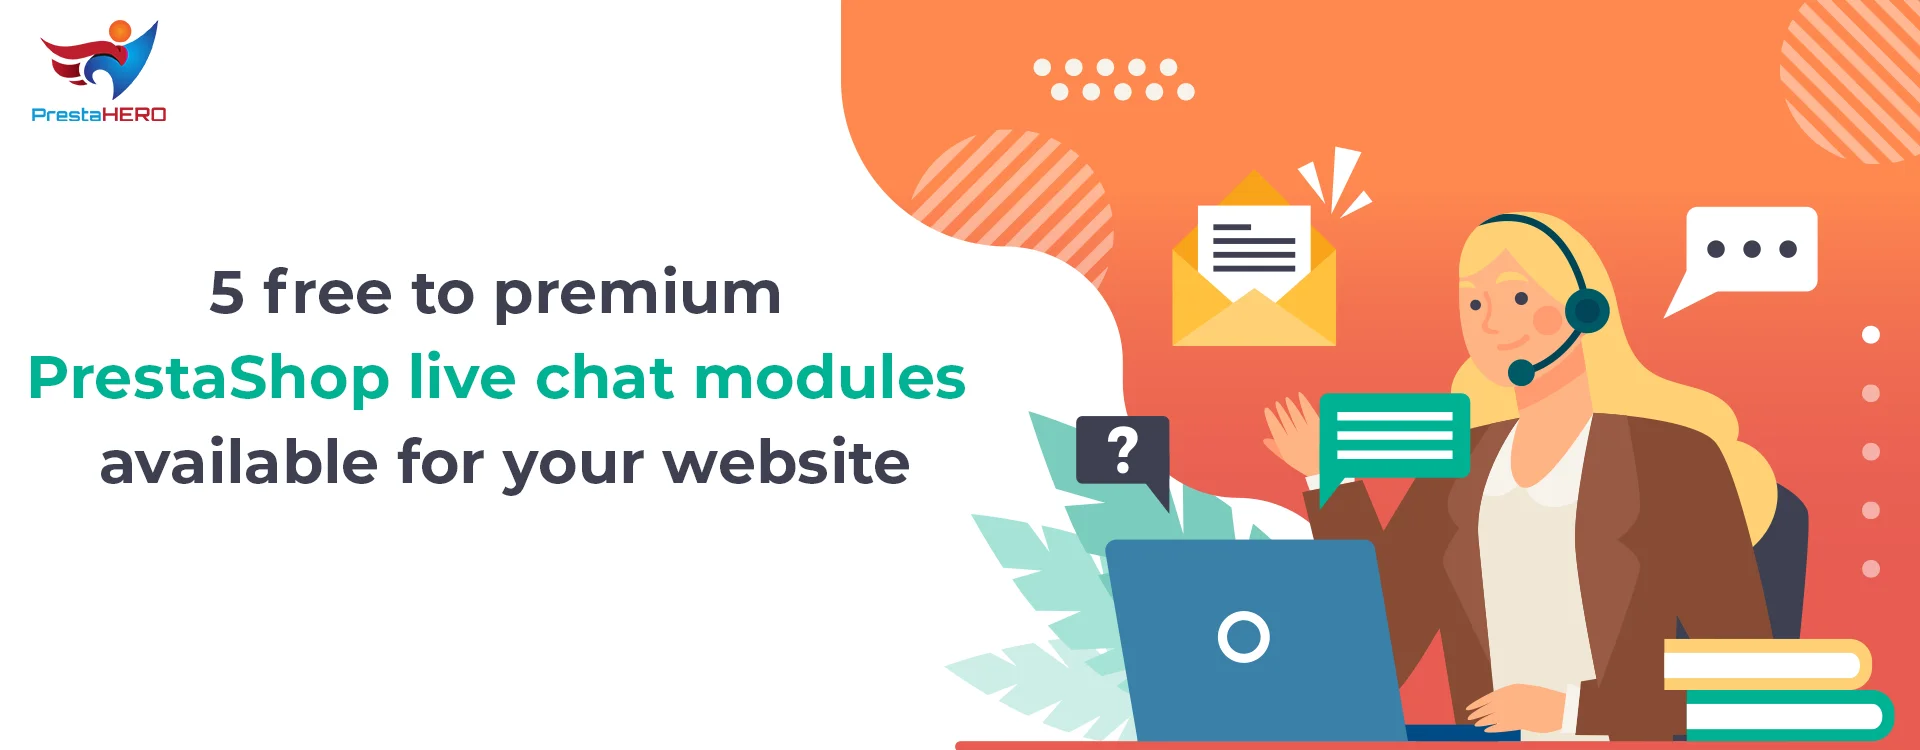 5 free to premium PrestaShop live chat modules available for your website